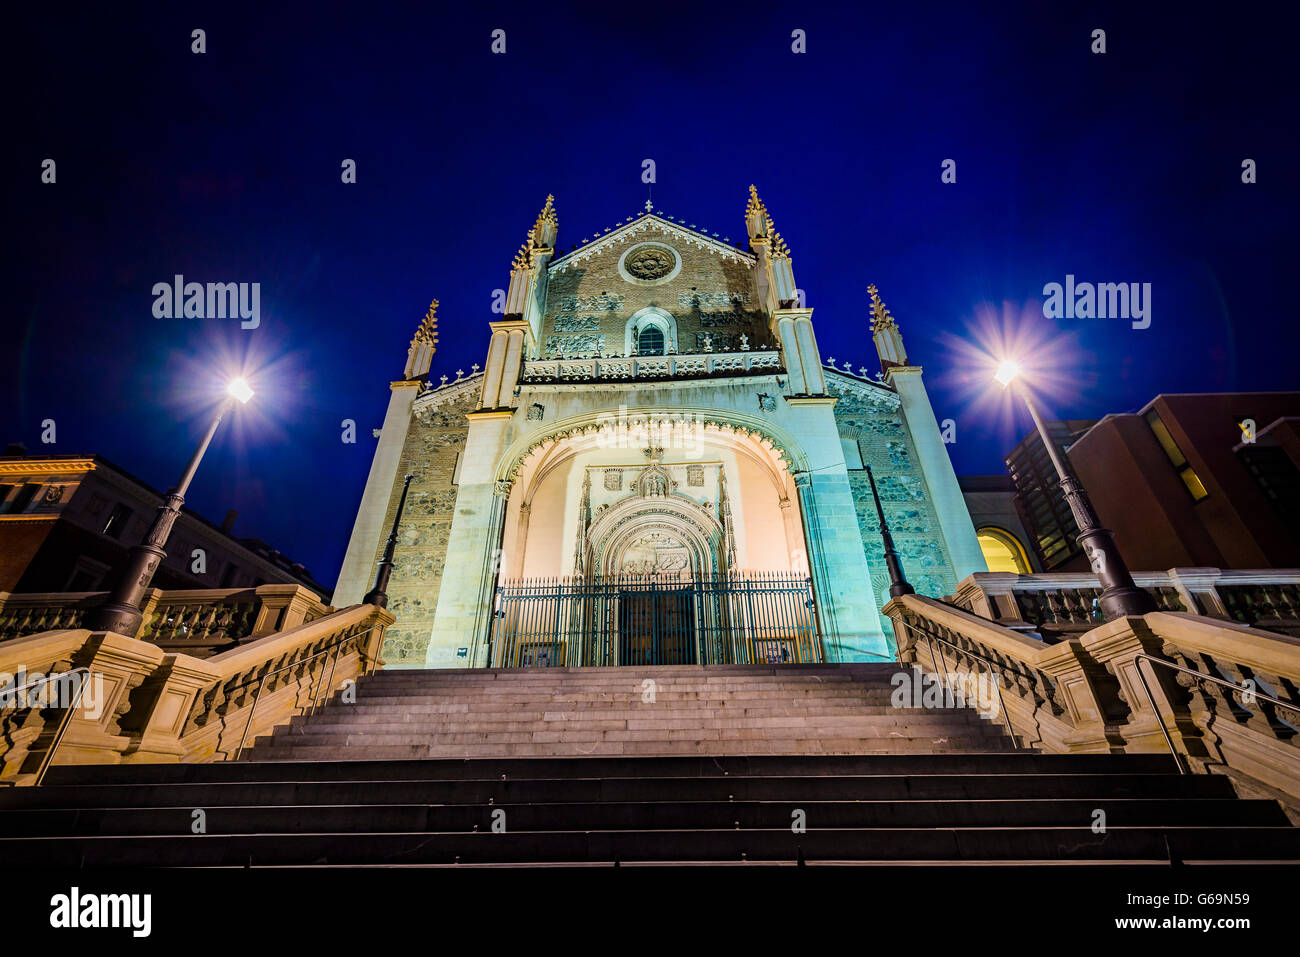 San Jerónimo el Real, St. Jerome the Royal, is a Roman Catholic church from the early 16th-century in central Madrid, Spain Stock Photo